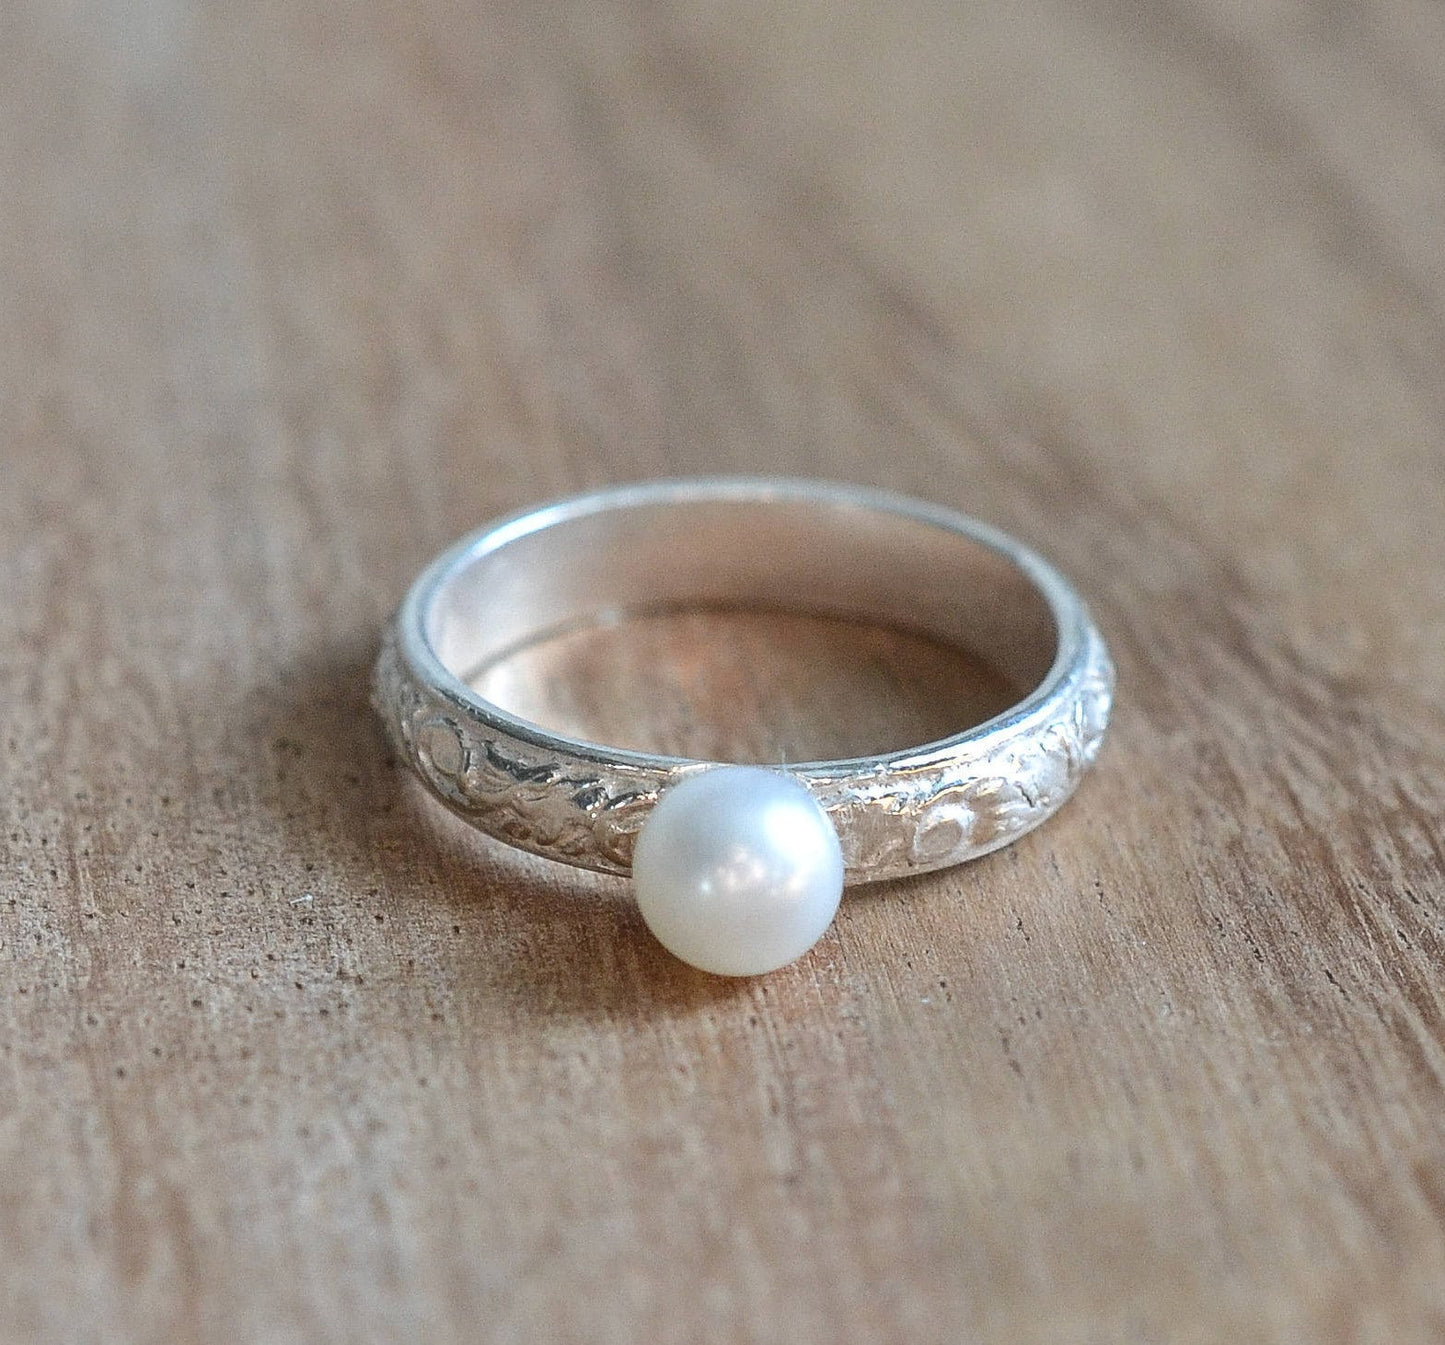 Freshwater Pearl Sterling Silver Ring // Sterling Silver Pattern Natural White Pearl Ring // June Birthstone Ring // Gift for Her Pearl Ring